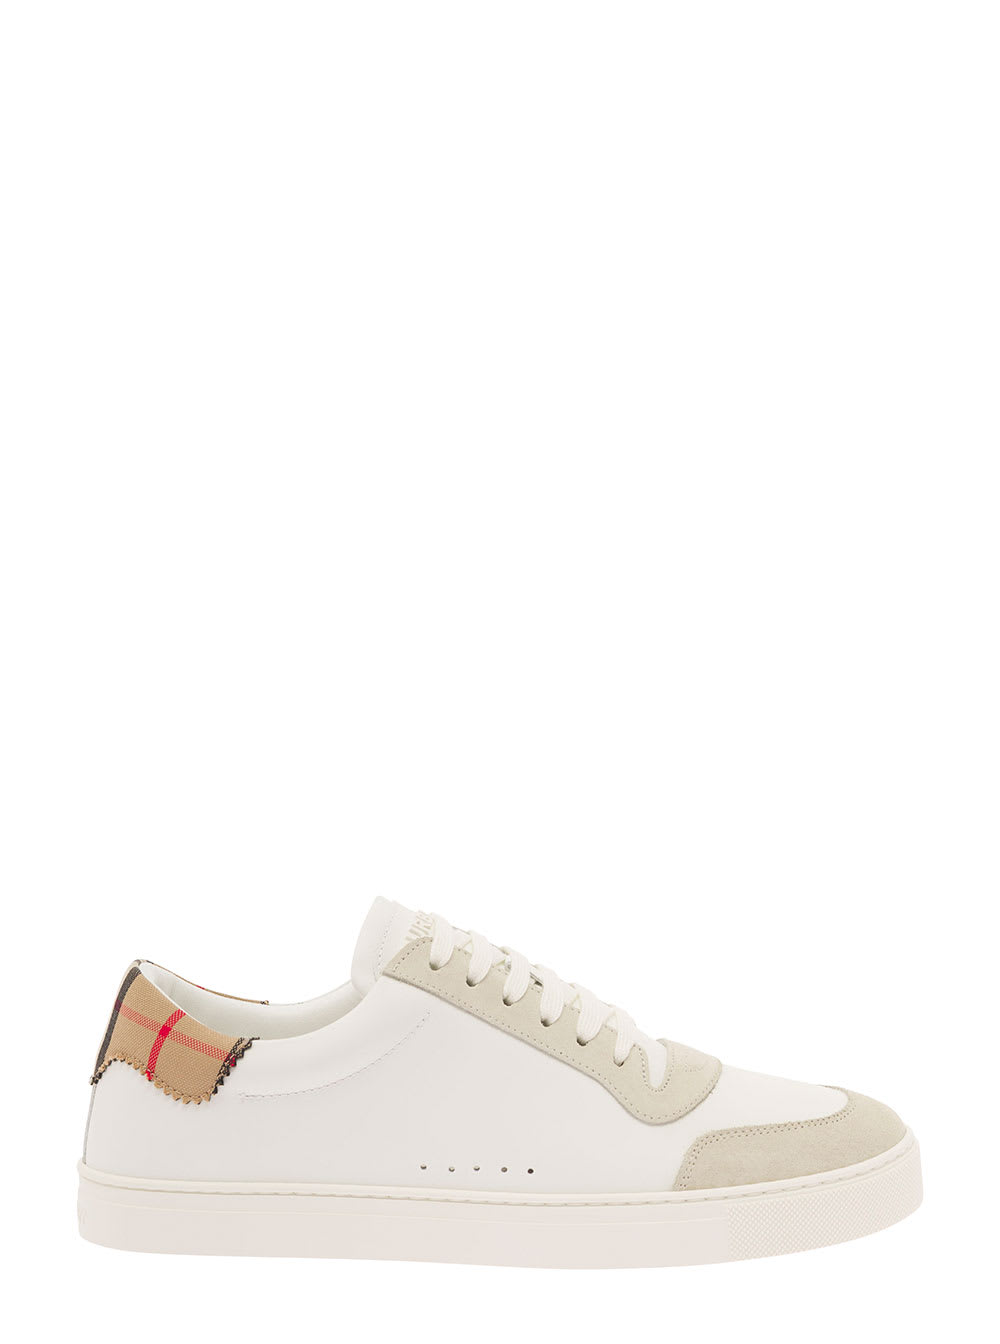 BURBERRY ROBIN WHITE LOW TOP SNEAKERS WITH VINTAGE CHECK MOTIF ON HEEL TAB IN LEATHER MAN